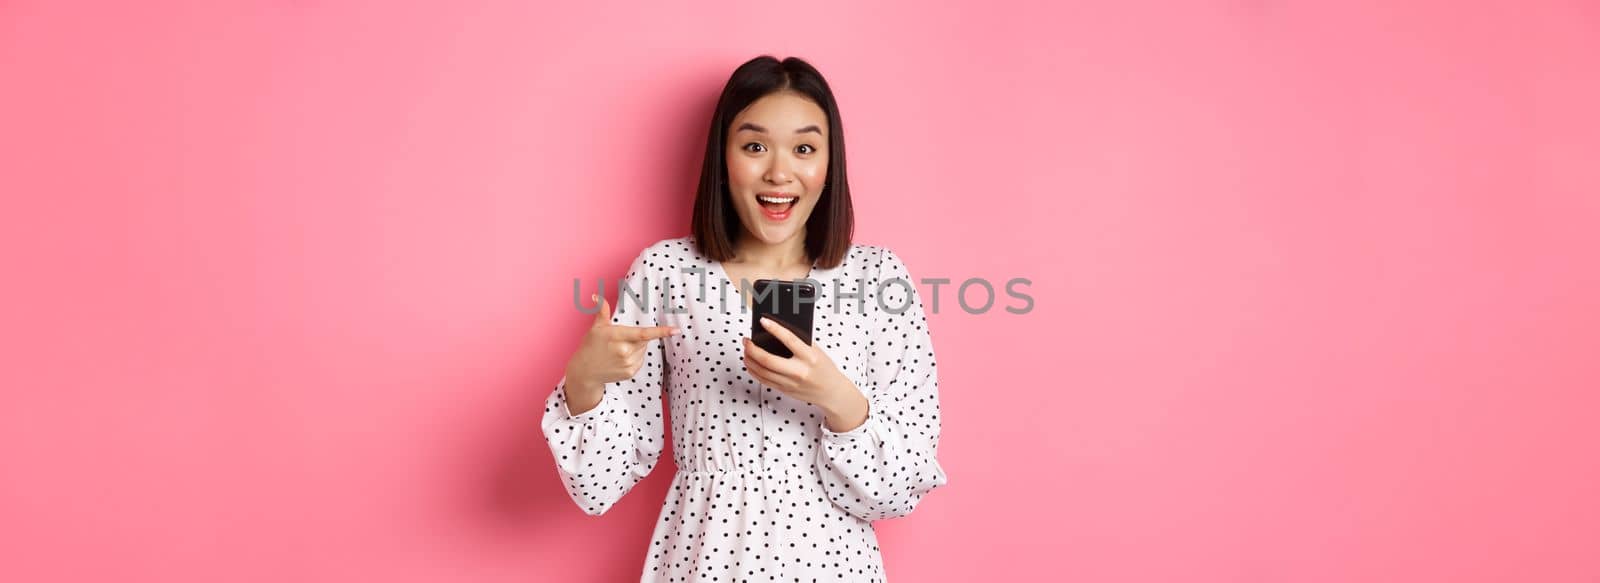 Online shopping and beauty concept. Amazed and happy asian woman pointing at mobile phone, talking about internet promo offer or app, standing over pink background.